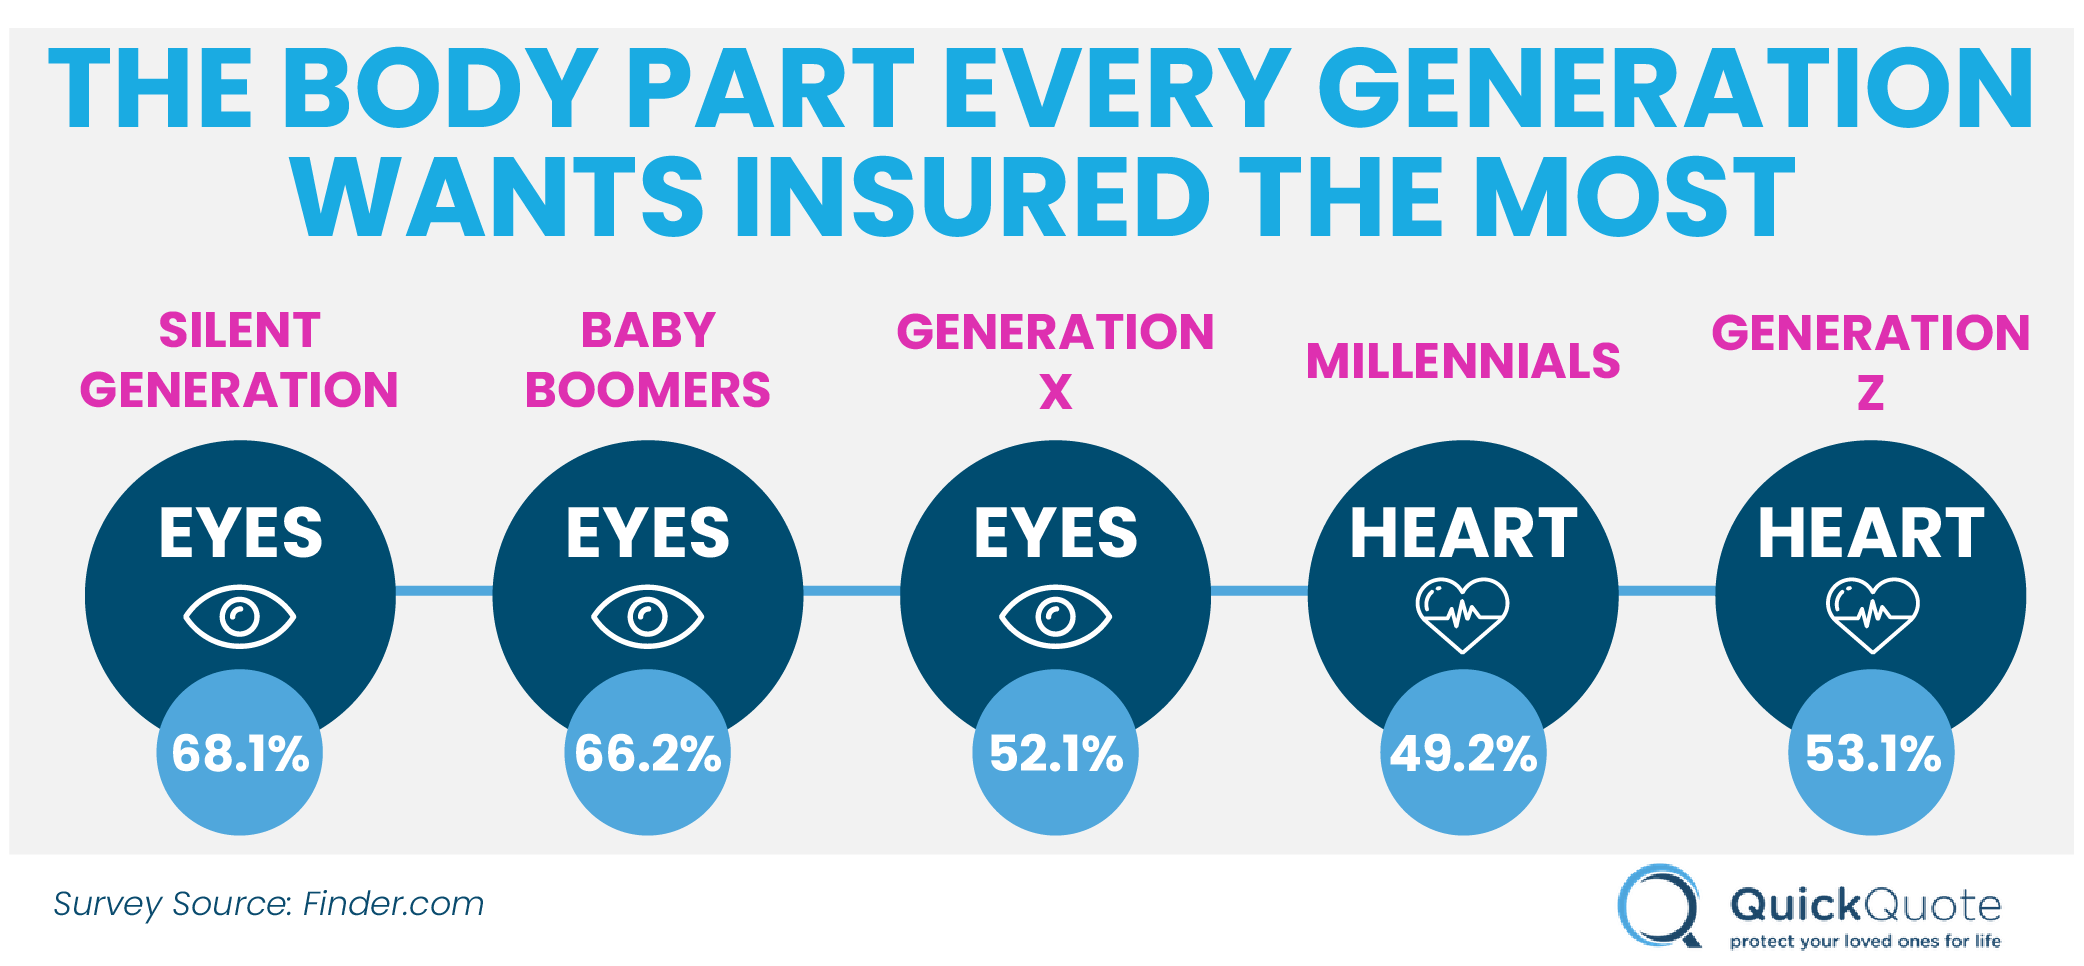 The Body Part Every Generation Wants Insured the Most